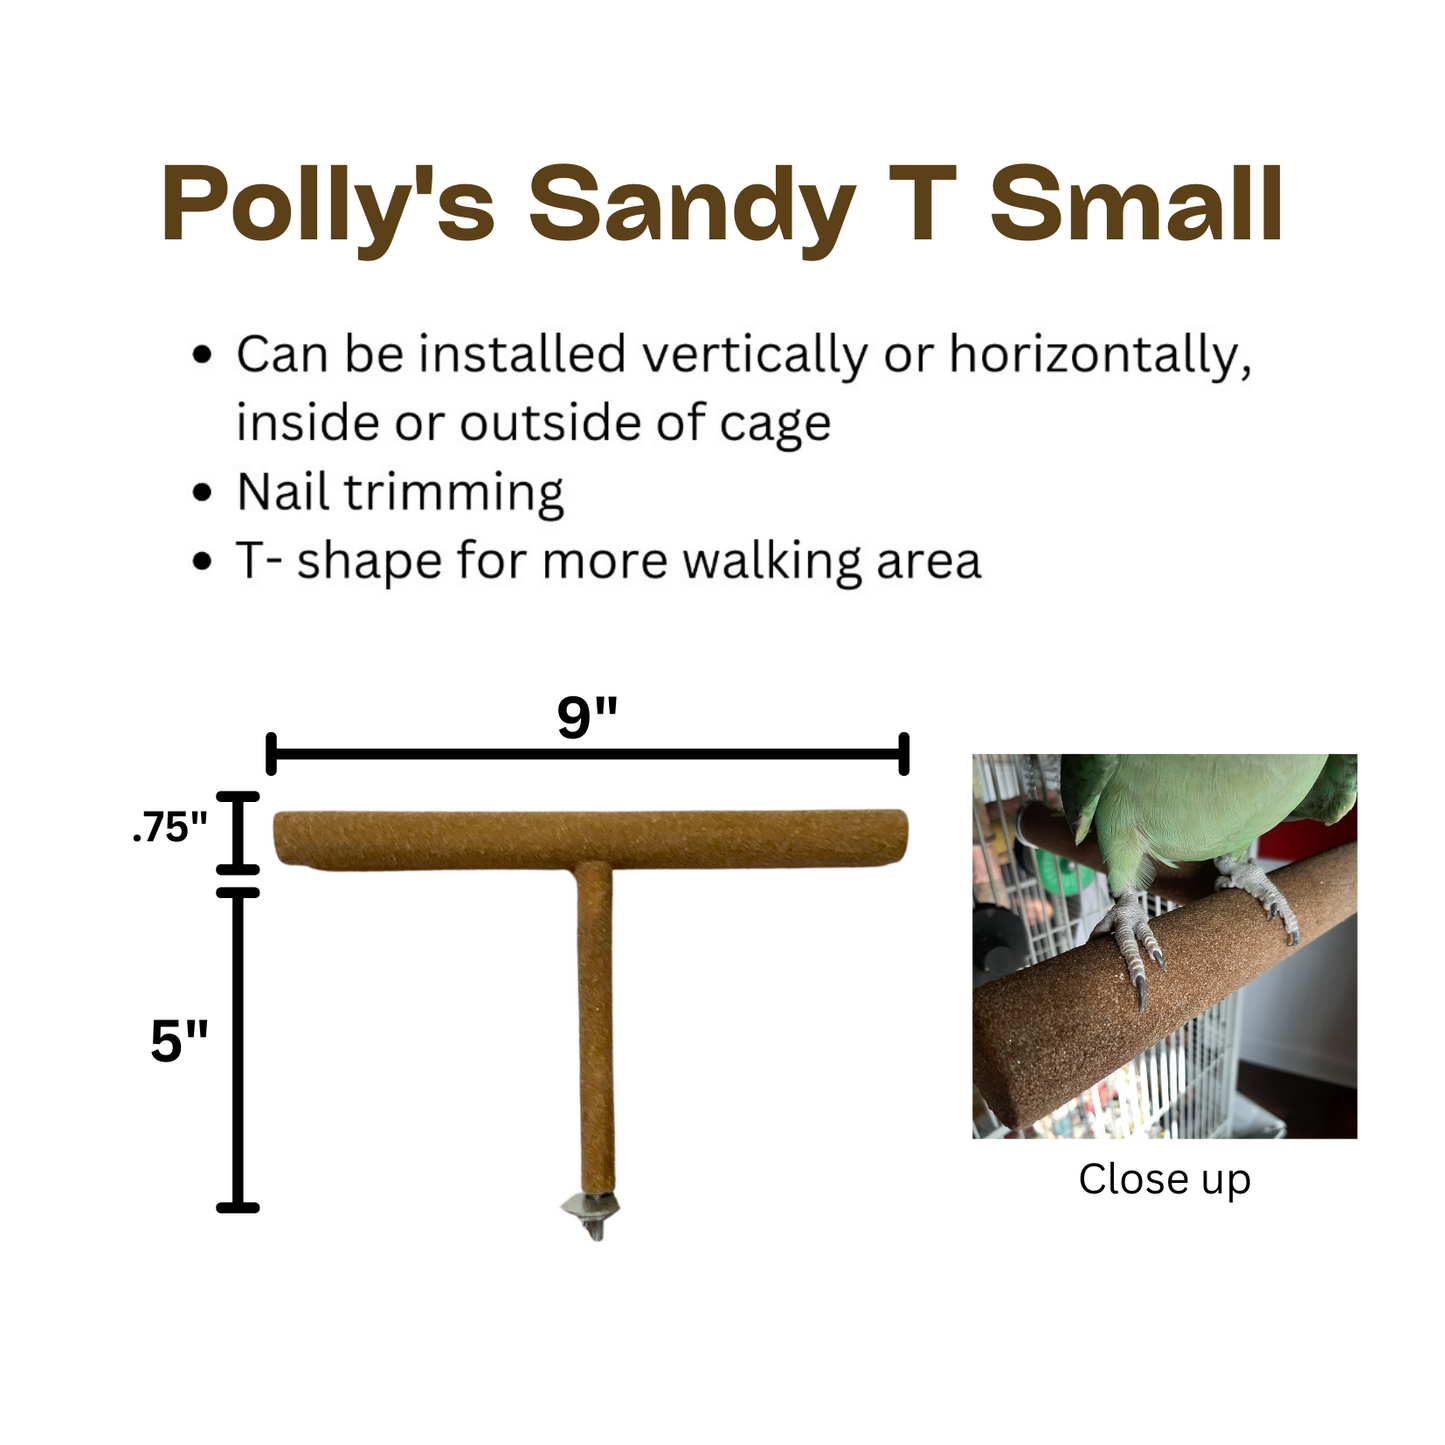 Polly's Sandy T Nail Trimming Bird Perch Small Brown